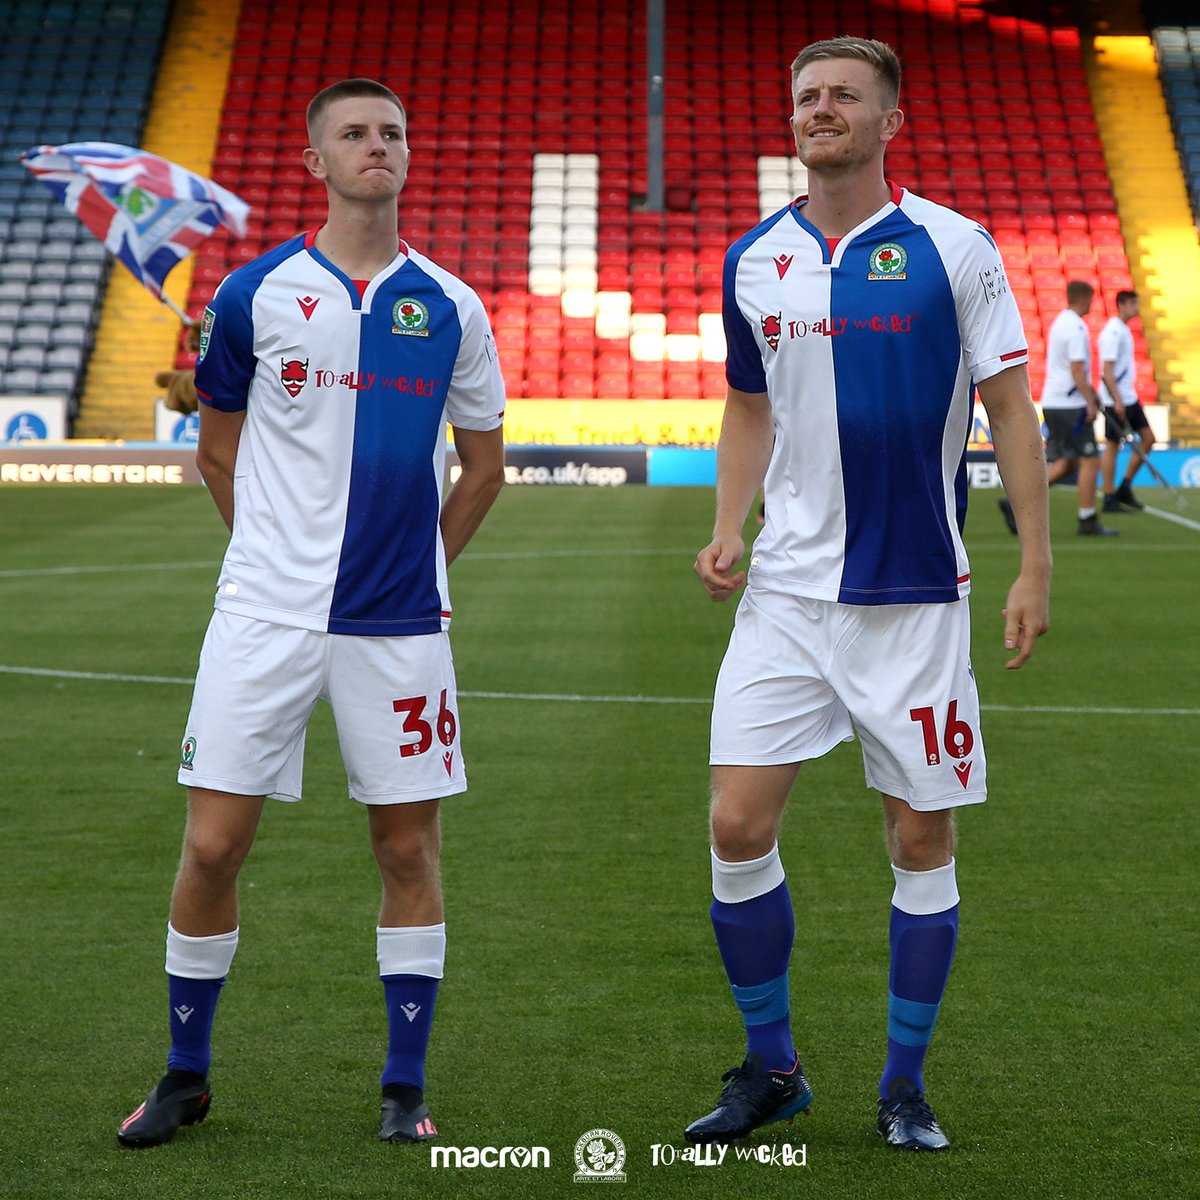 𝑻𝒉𝒆𝒏 🆚 𝑵𝒐𝒘

✍️ The Whartons are both signed up until 2027!

#TwoOfOurOwn 🌹 | #Rovers 🔵⚪️